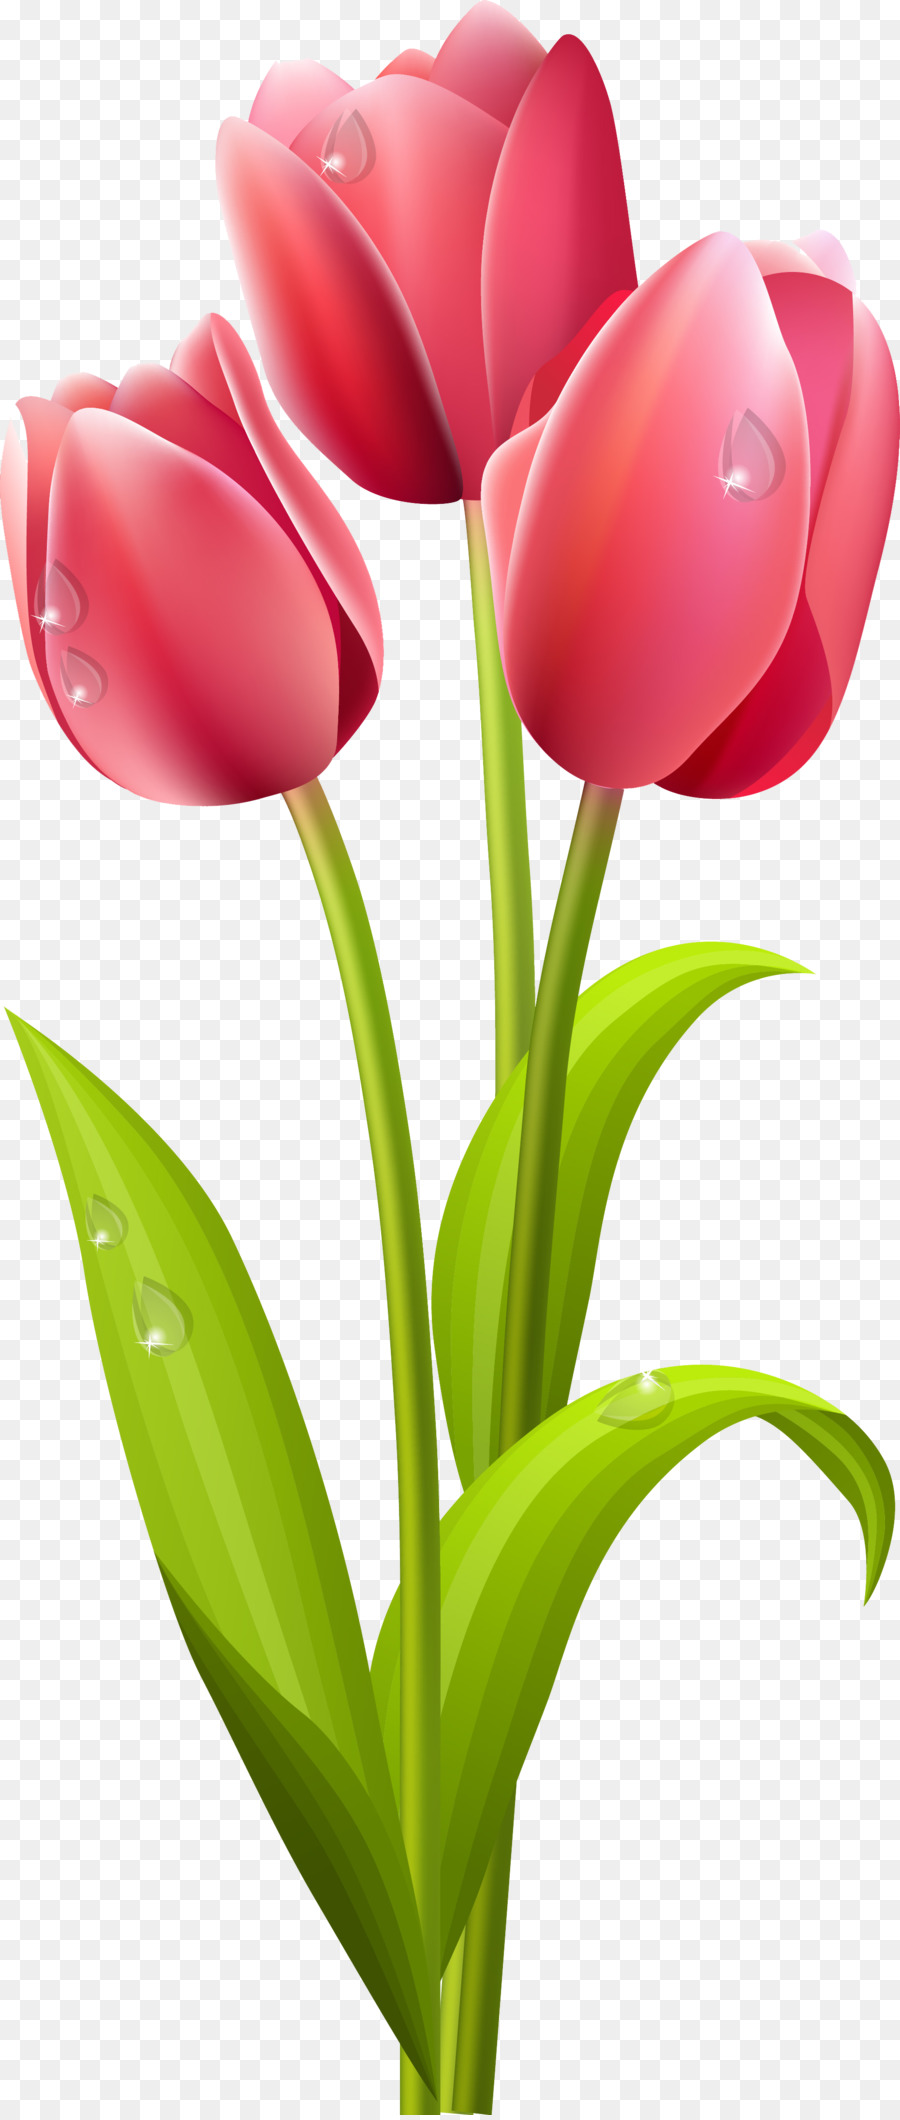 Download Flowers Clipart Background clipart - Tulip, Flower ...